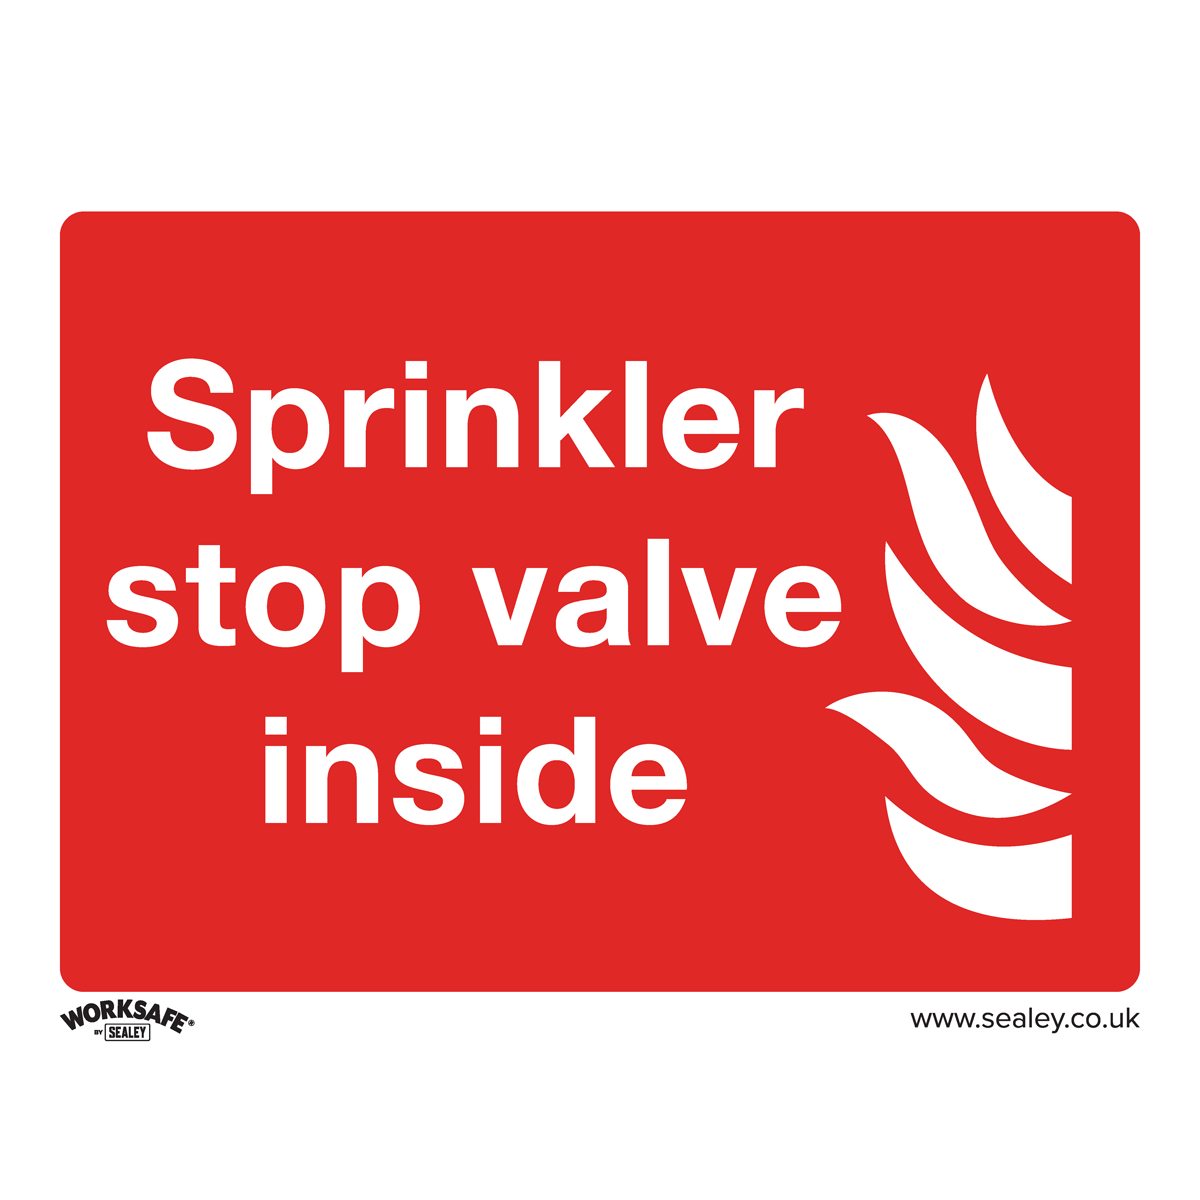 Safe Conditions Safety Sign - Sprinkler Stop Valve - Self-Adhesive Vinyl